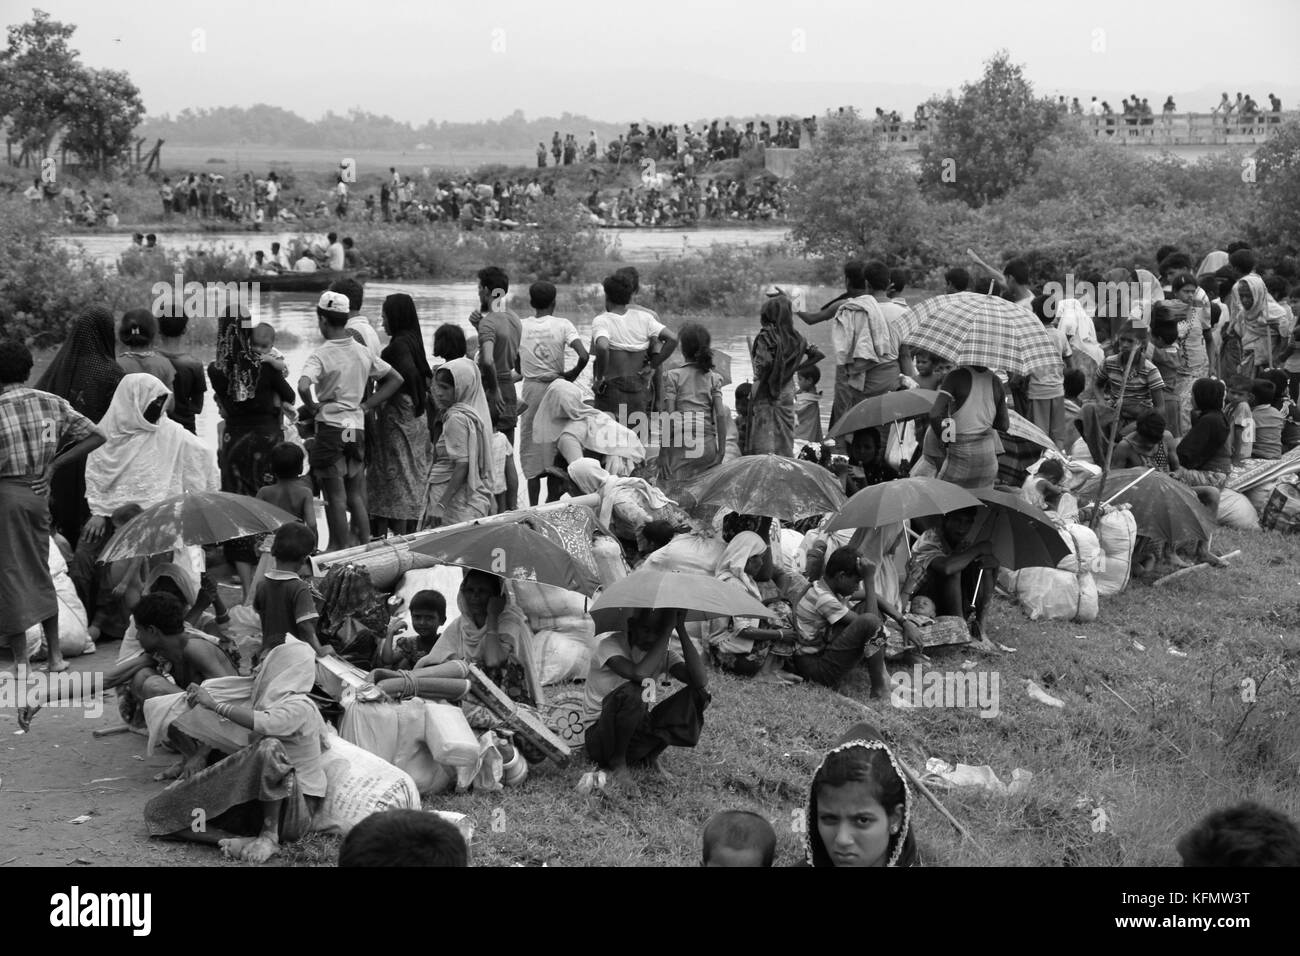 Myanmar: Rohingya refugees fleeing military operation in Myanmar’s Rakhine state, gather at Myanmar-Bangladesh border fence near Maungdaw to take shelter into Bangladesh on September 7, 2017. Over half a million Rohingya refugees from Myanmar’s Rakhine state, have crosses into Bangladesh since August 25, 2017 according to UN. The Myanmar military's latest campaign against the Rohingyas began after the attack on multiple police posts in Rakhine state. © Rehman Asad/Alamy Stock Photo Stock Photo